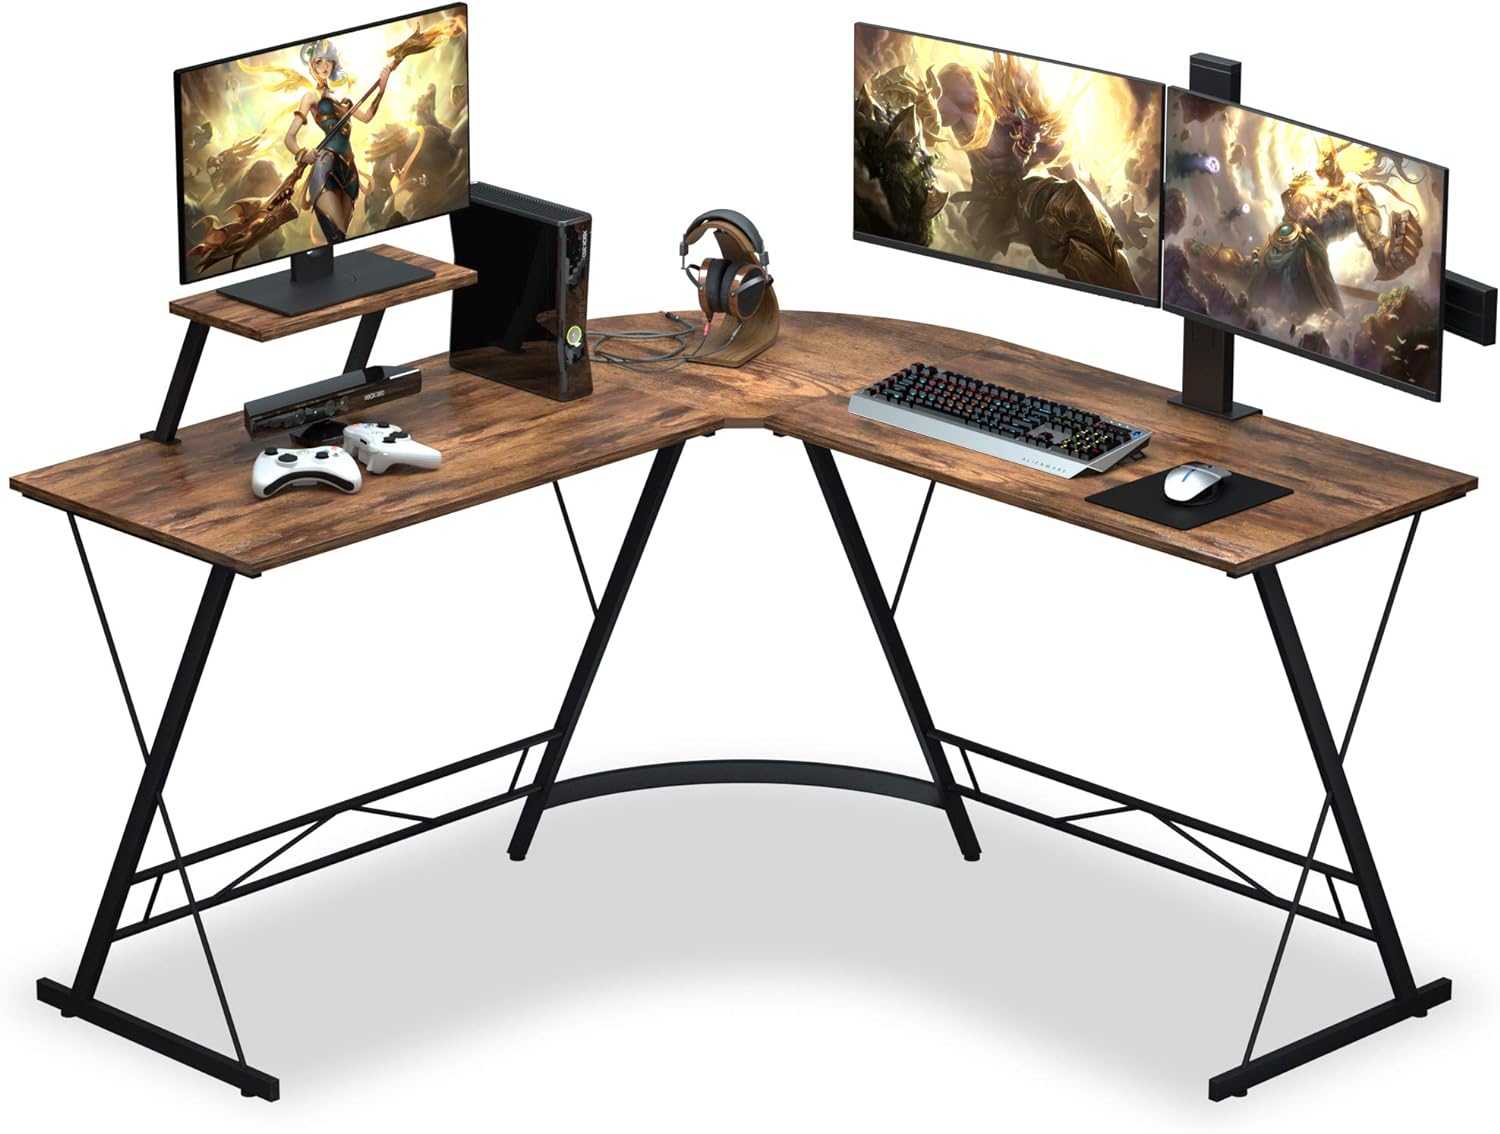 OTK L Shaped Desk with Round Corner, 51 L Shaped Gaming Desk, Corner Computer Desk Table with Large Monitor Stand for Home Office, Sturdy Writing Workstation, Relic